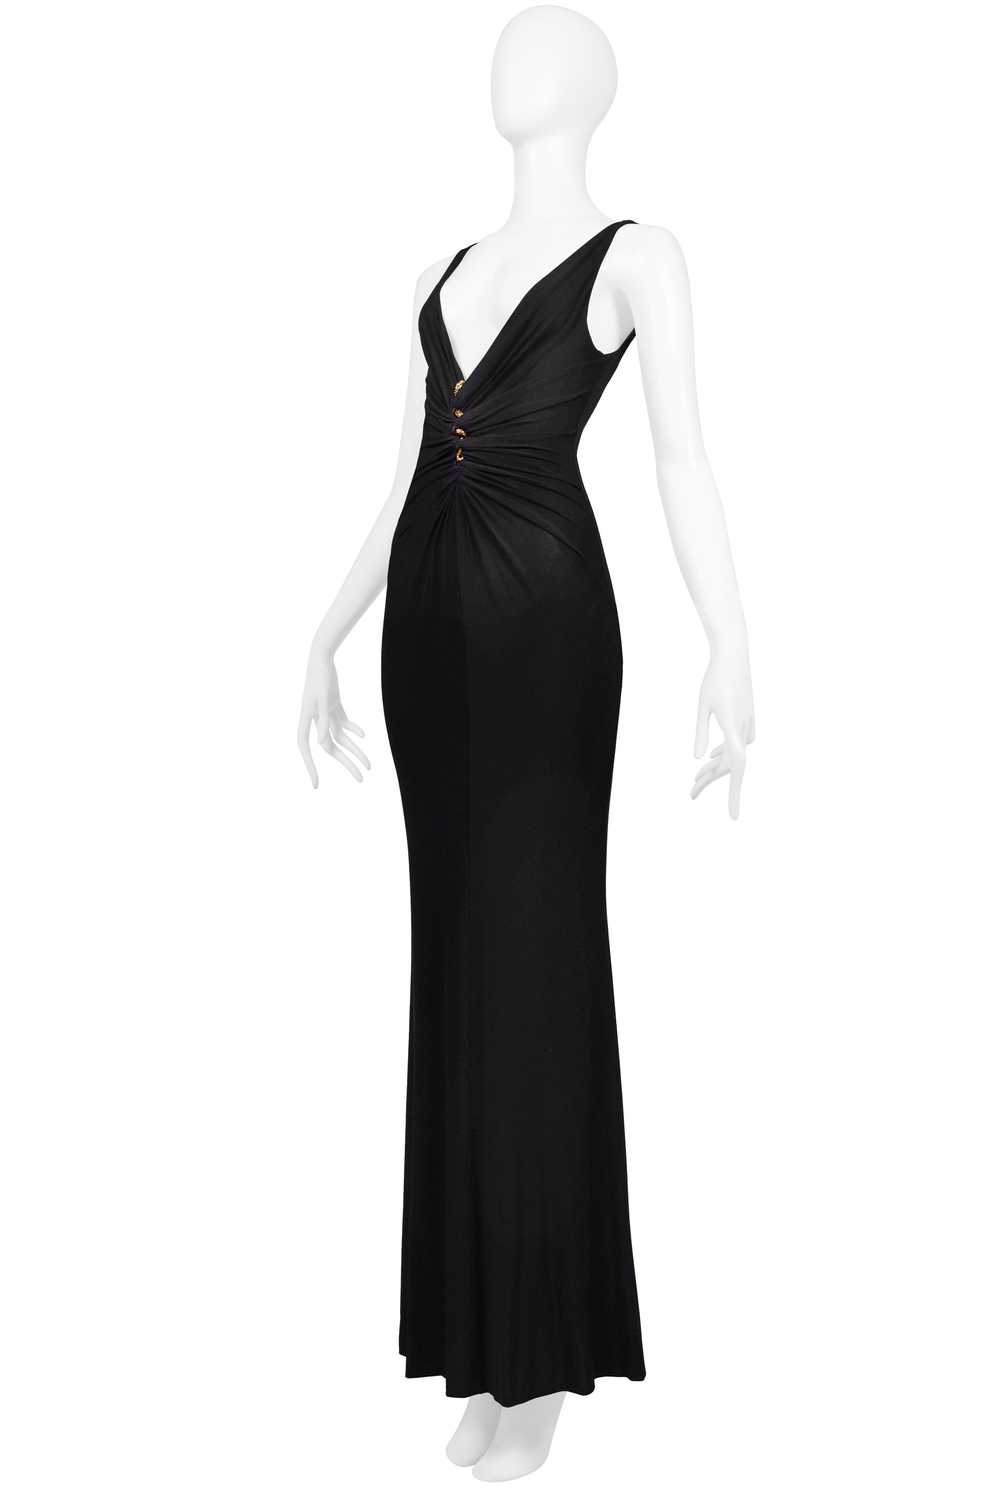 ROBERTO CAVALLI BLACK JERSEY EVENING GOWN WITH GO… - image 1